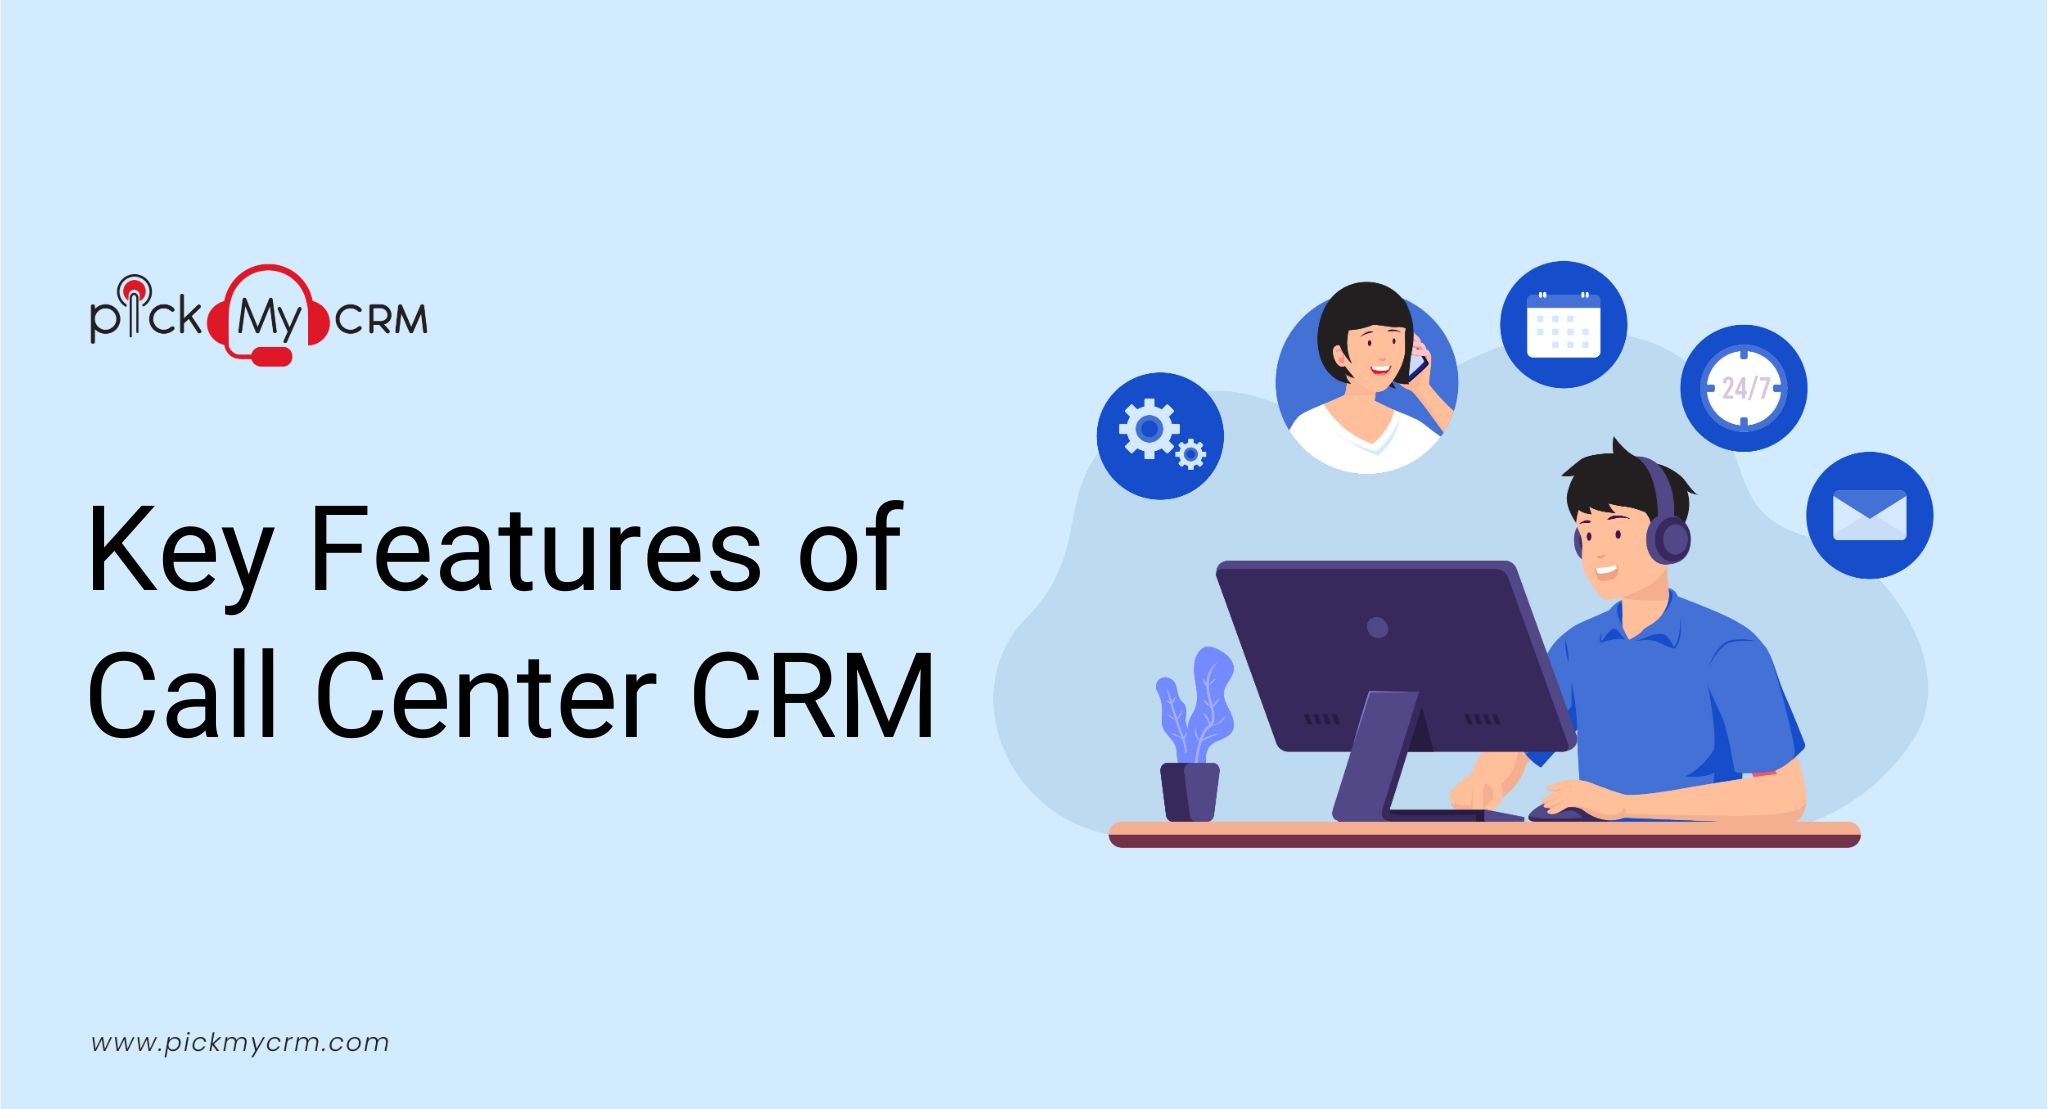 Features of Call Center CRM